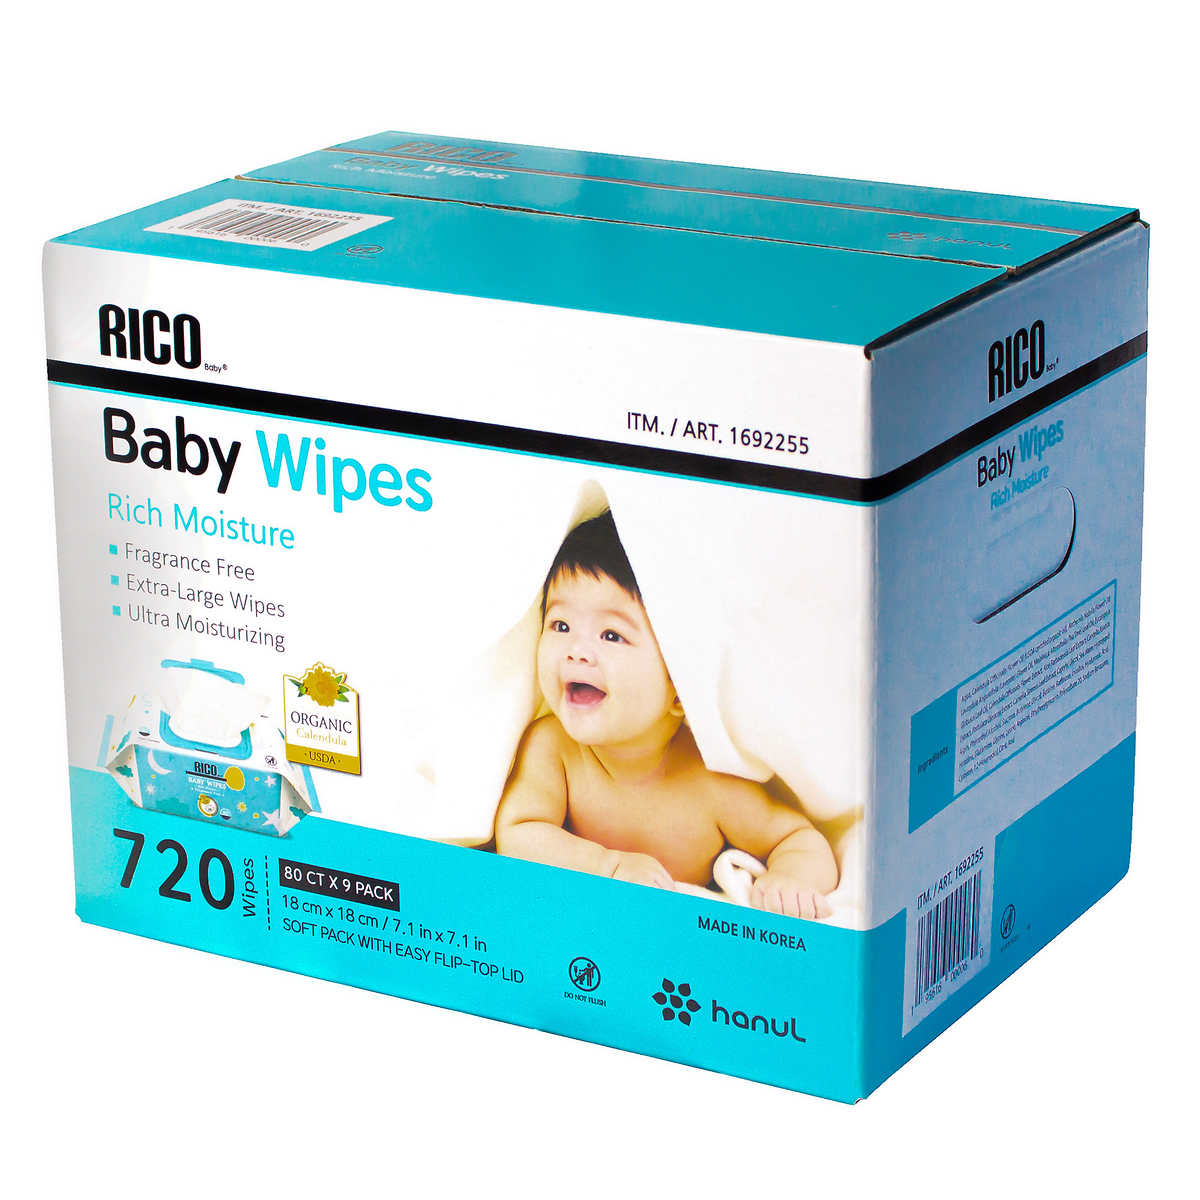 WaterWipes Sensitive Unscented Hypoallergenic Baby Wipes 720 Count